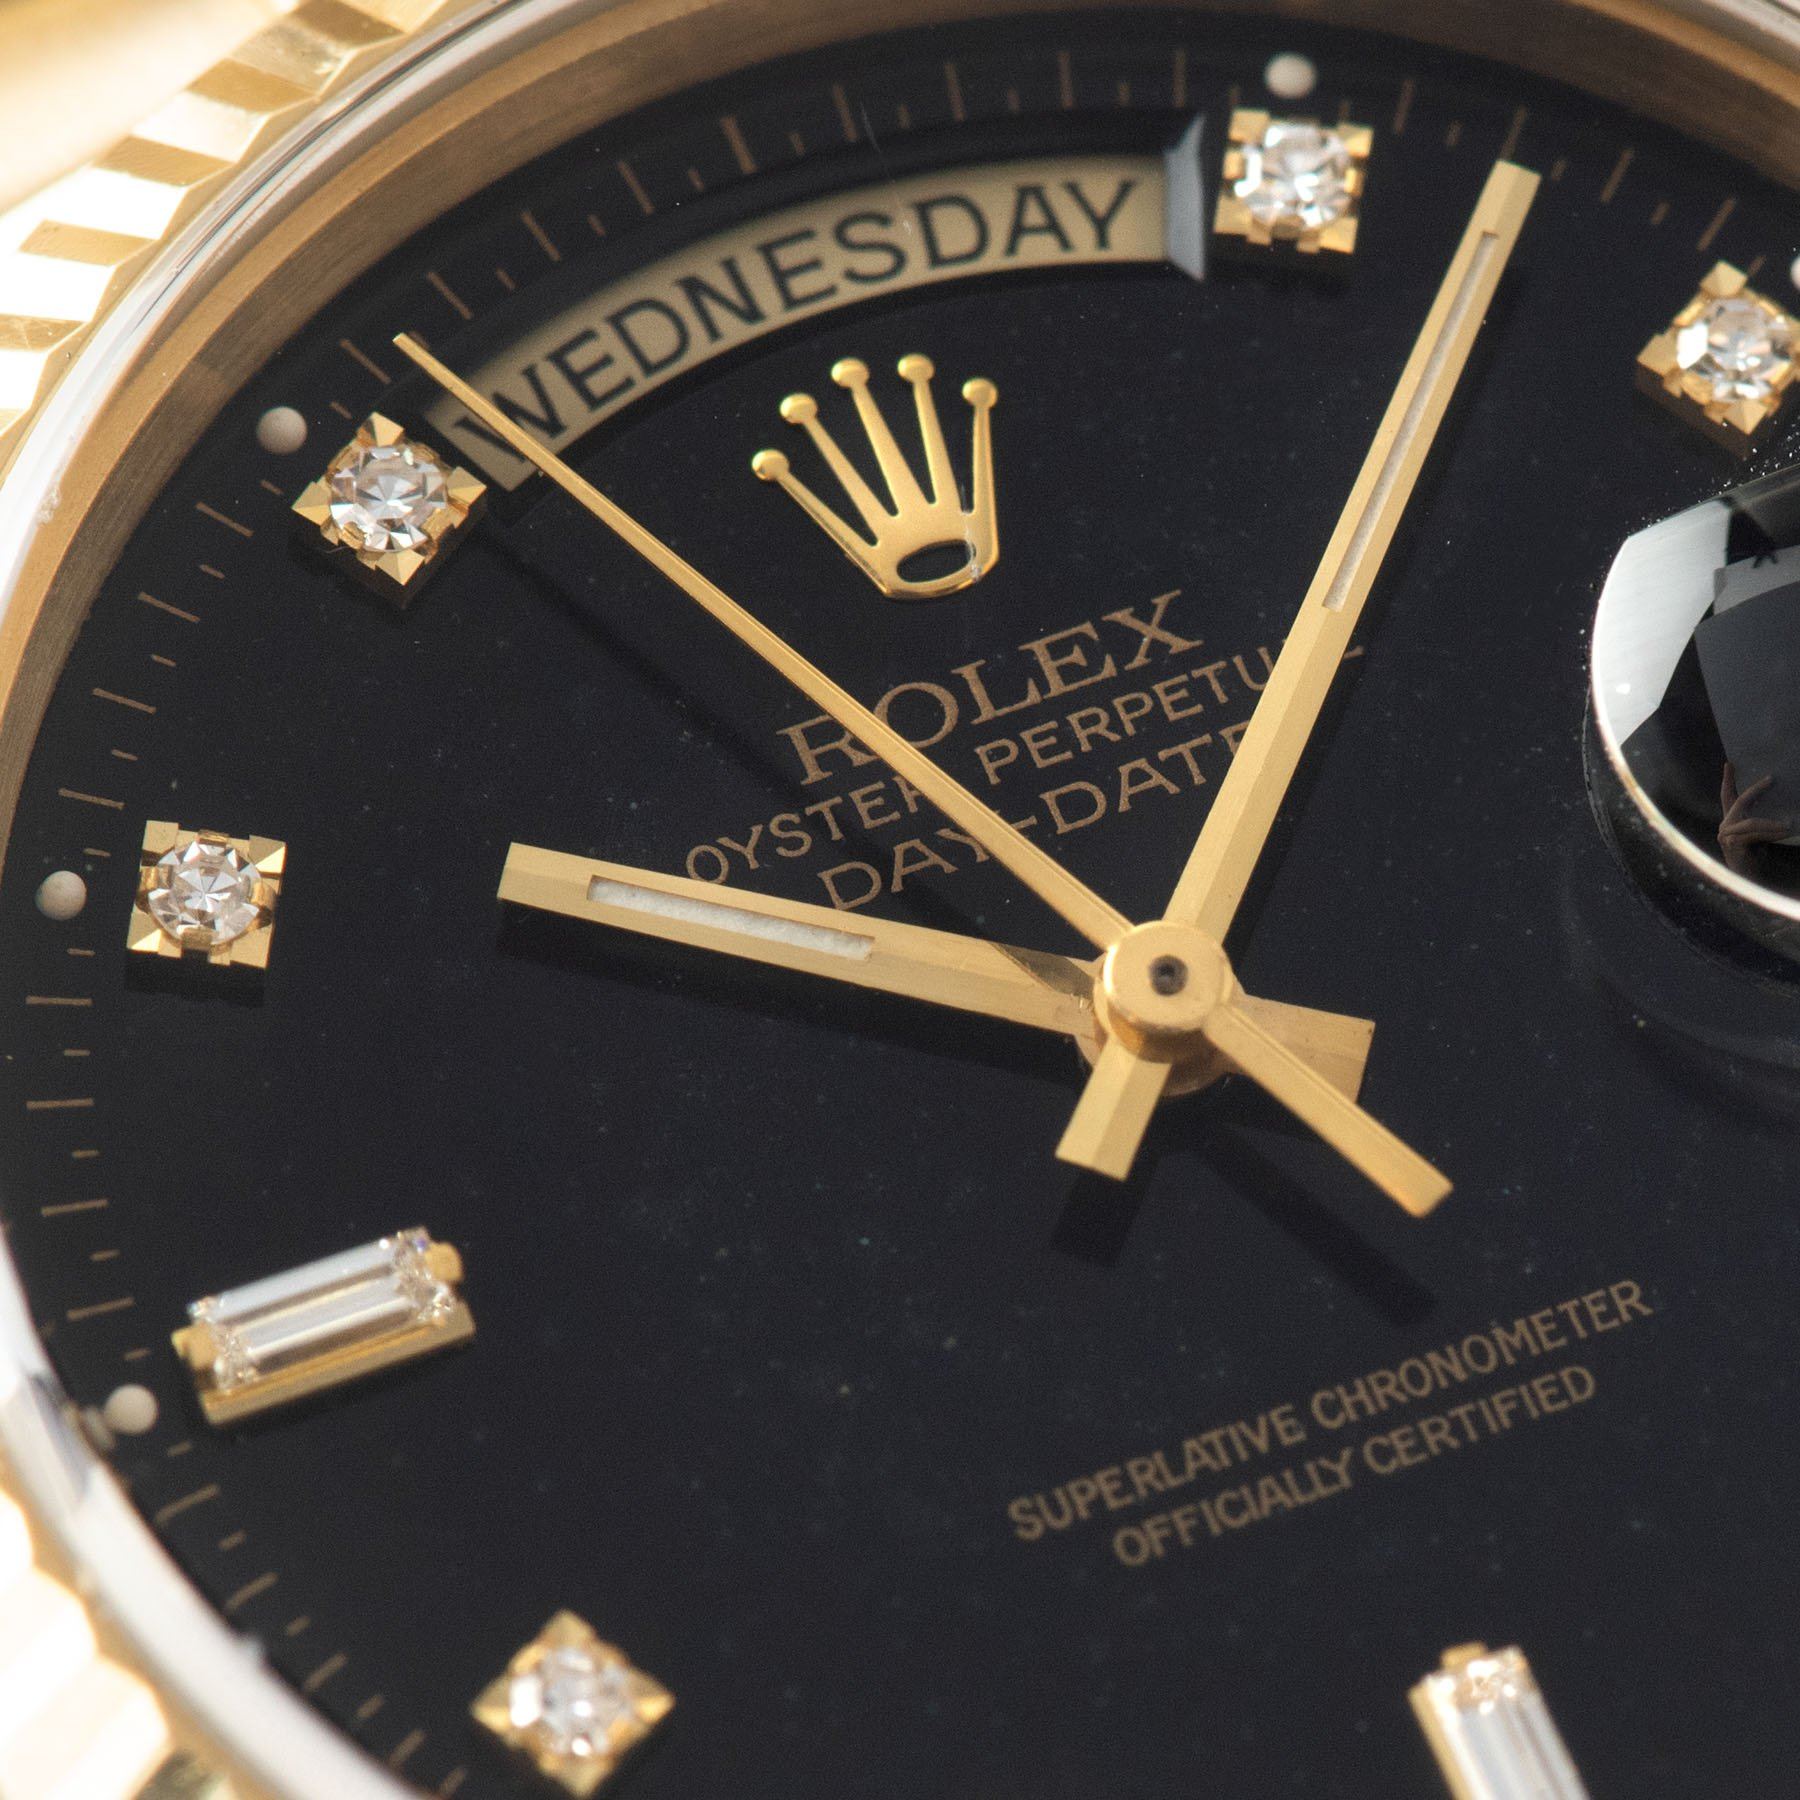 Rolex Day-Date Reference 18238 Black Diamond Dial